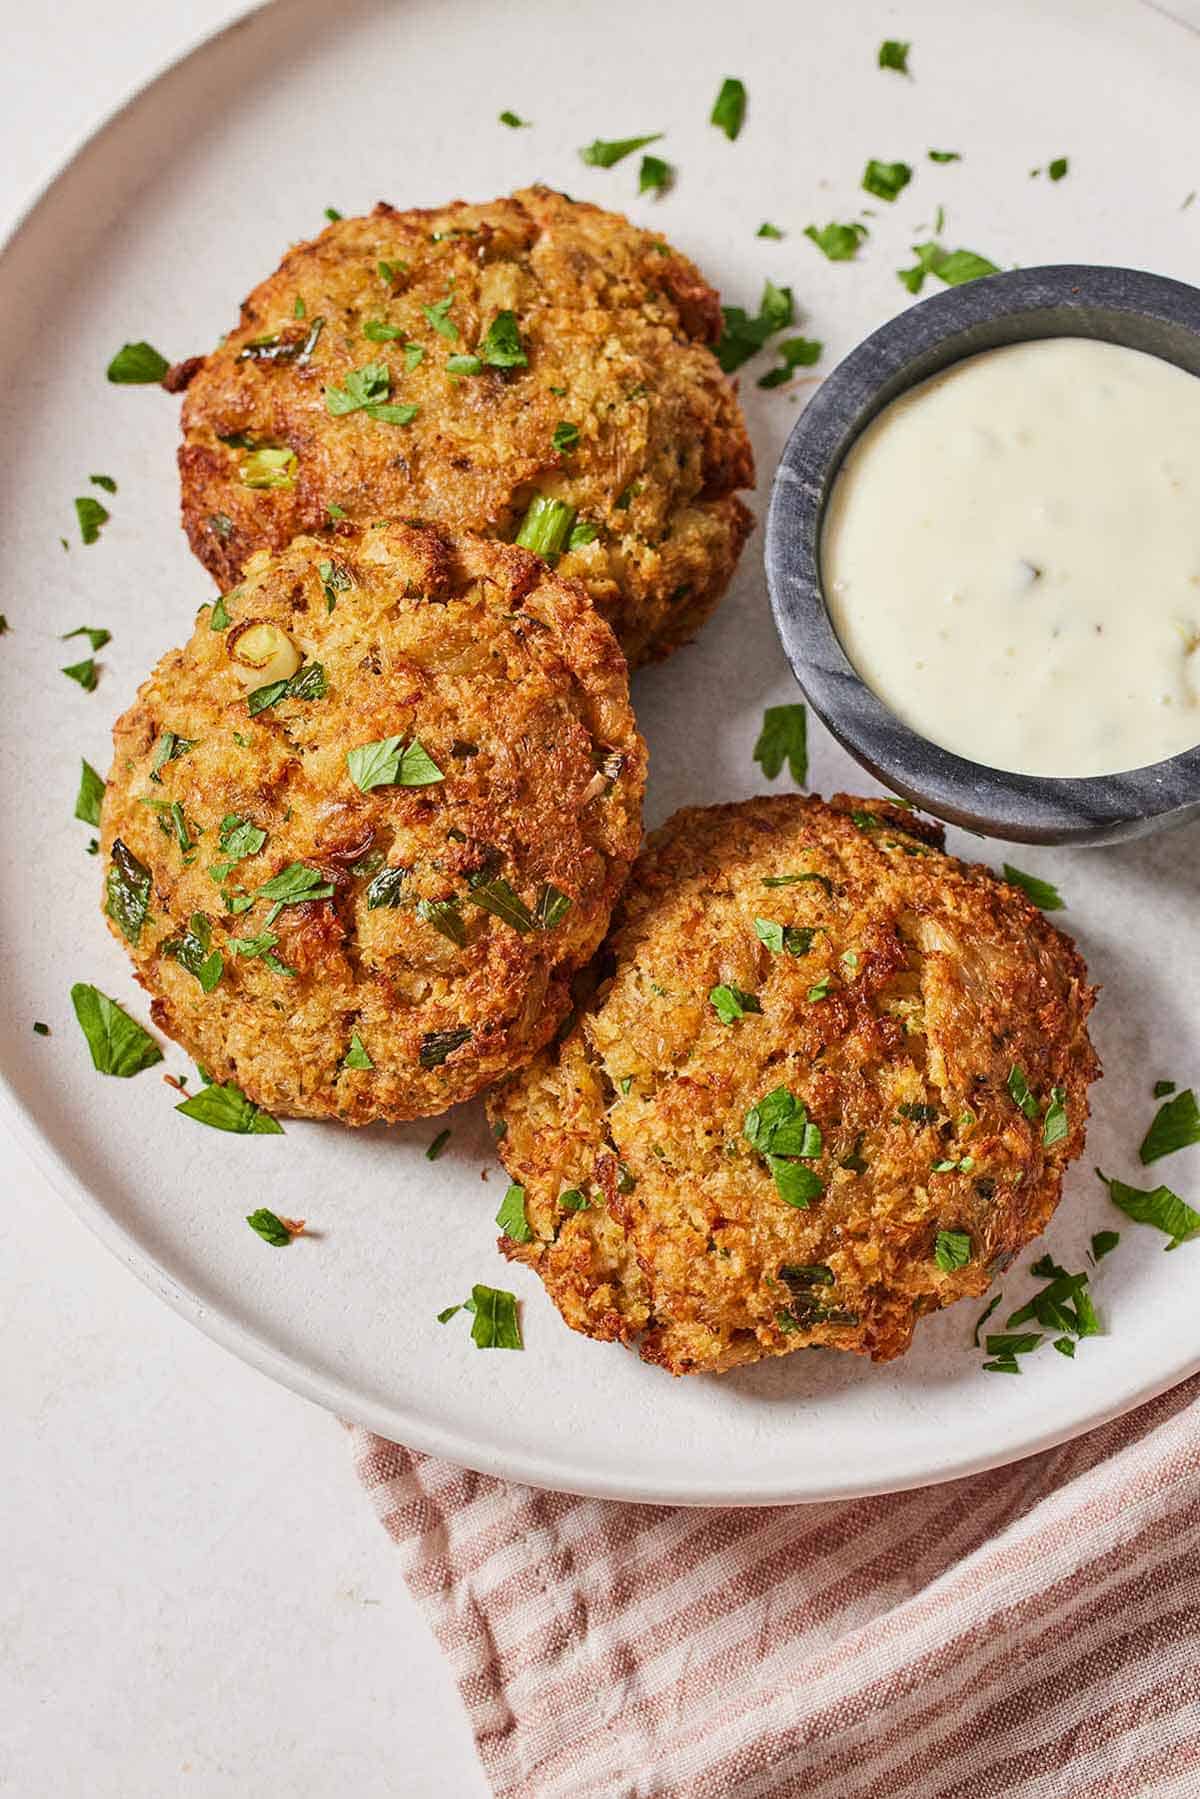 Overhead view of a plate of three air fryer crab cakes with a dip on the side.